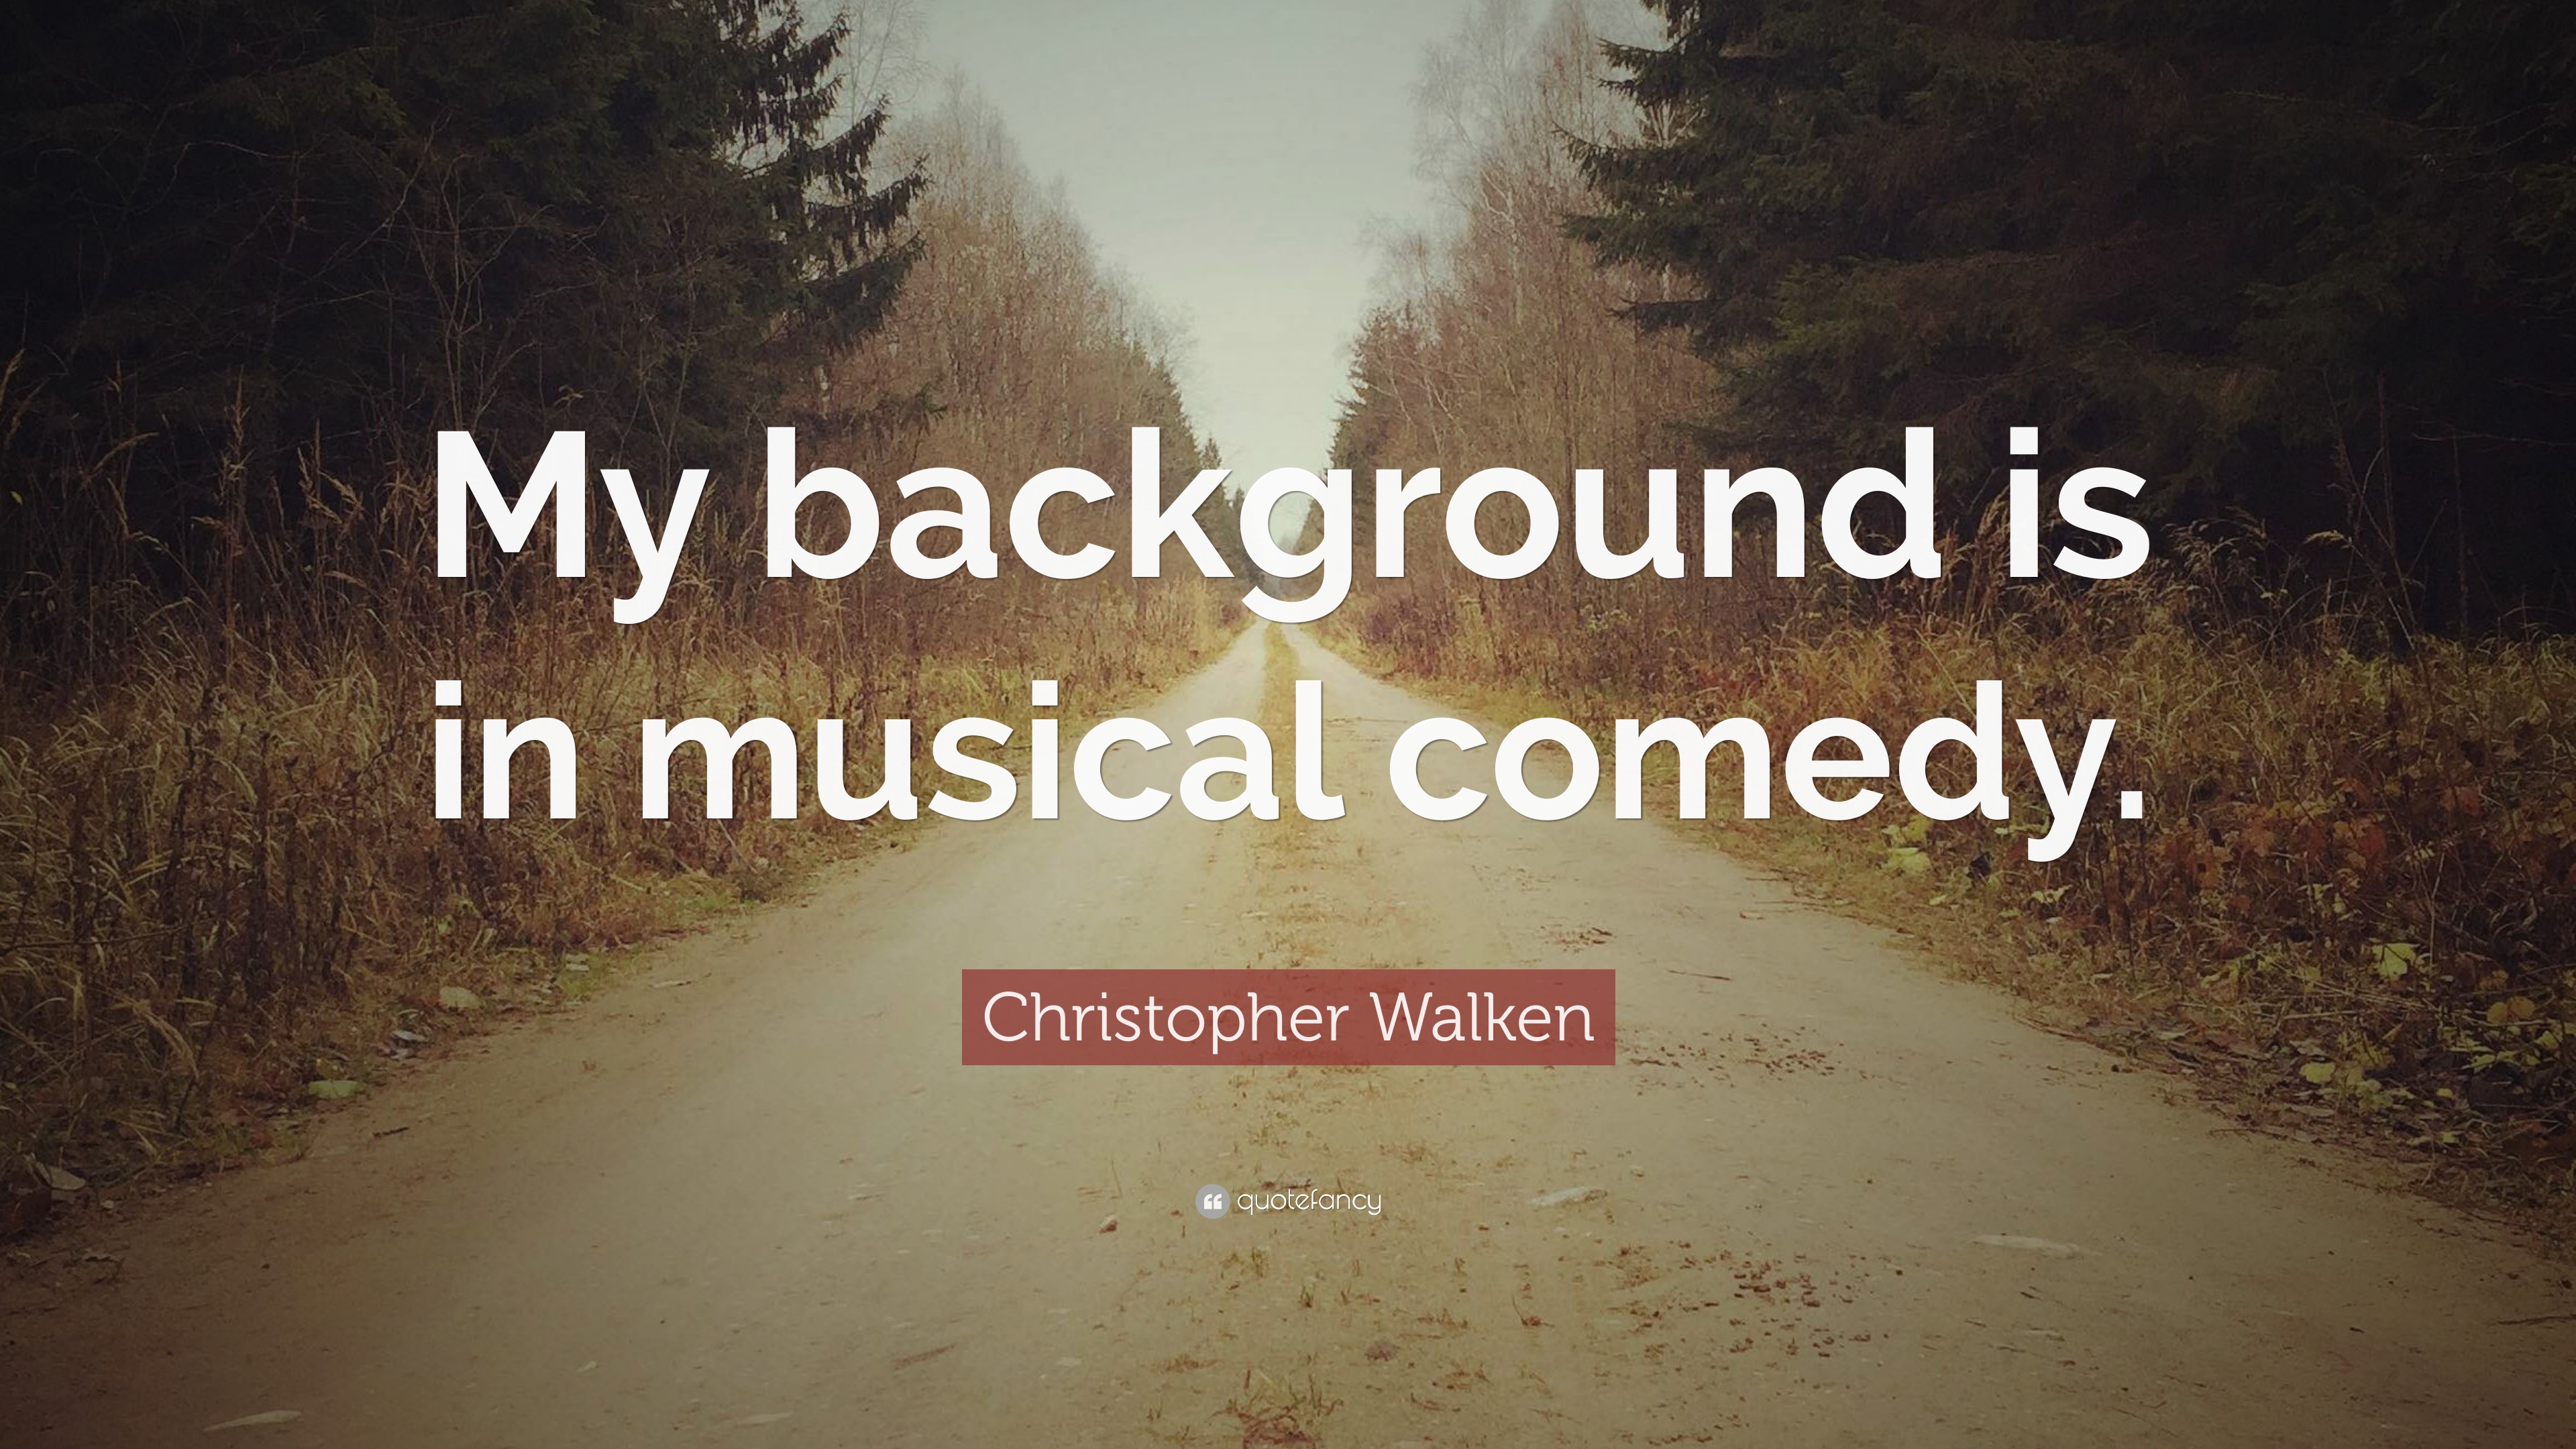 Christopher Walken Quote: “My background is in musical comedy.” 7